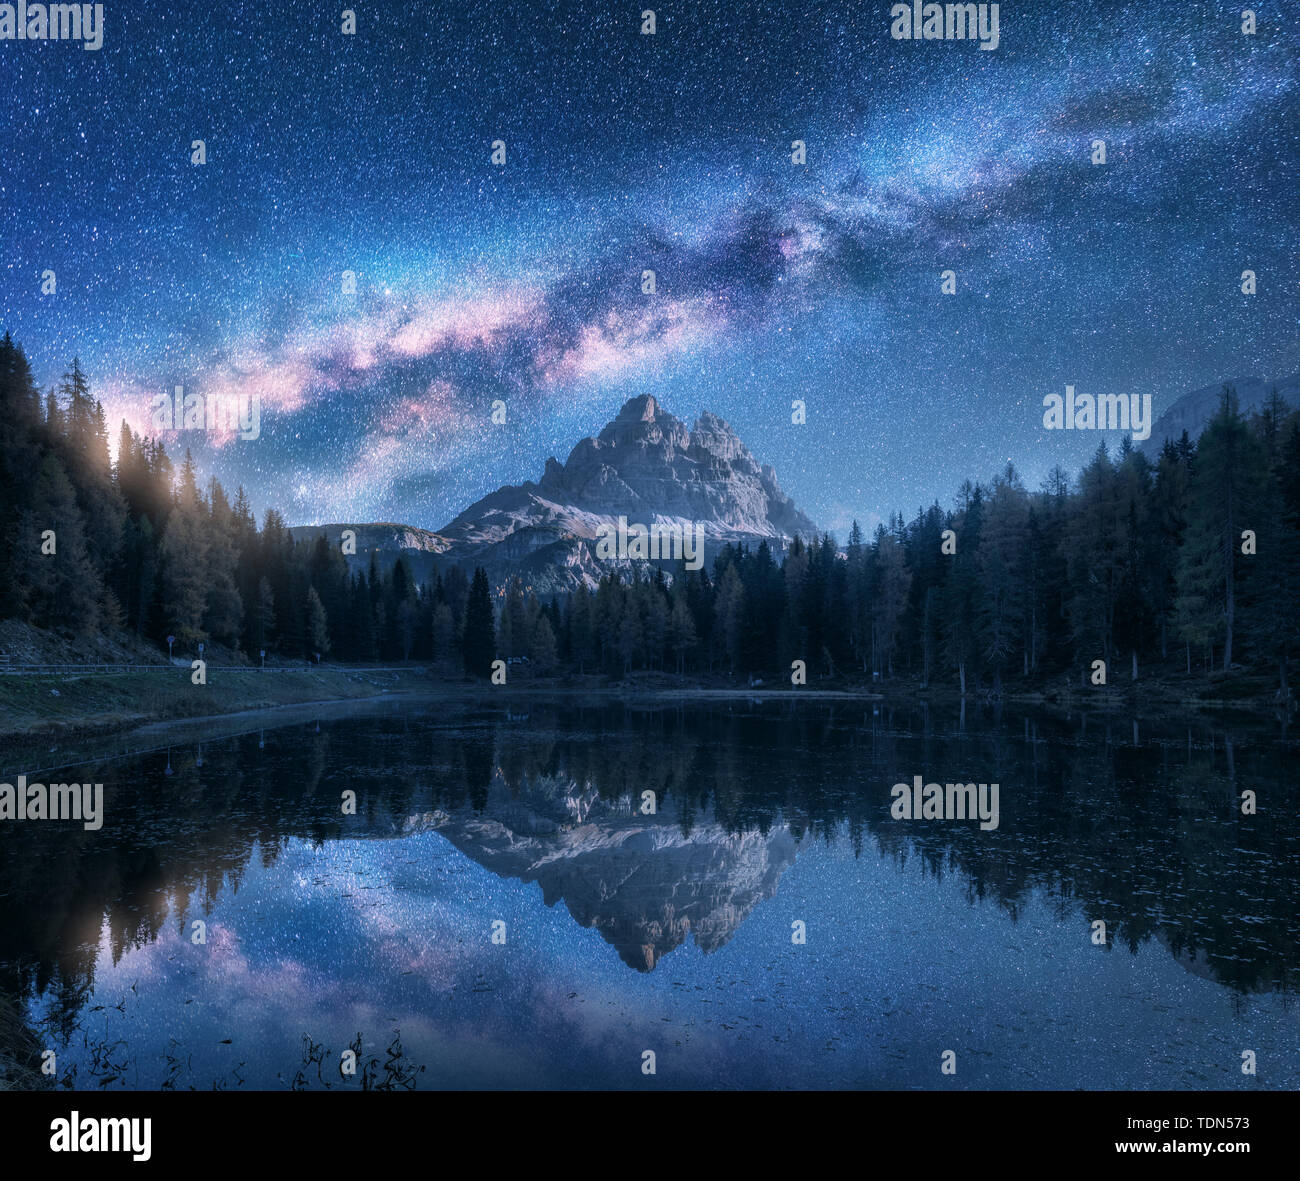 Milky Way over mountains and Antorno lake at night Stock Photo